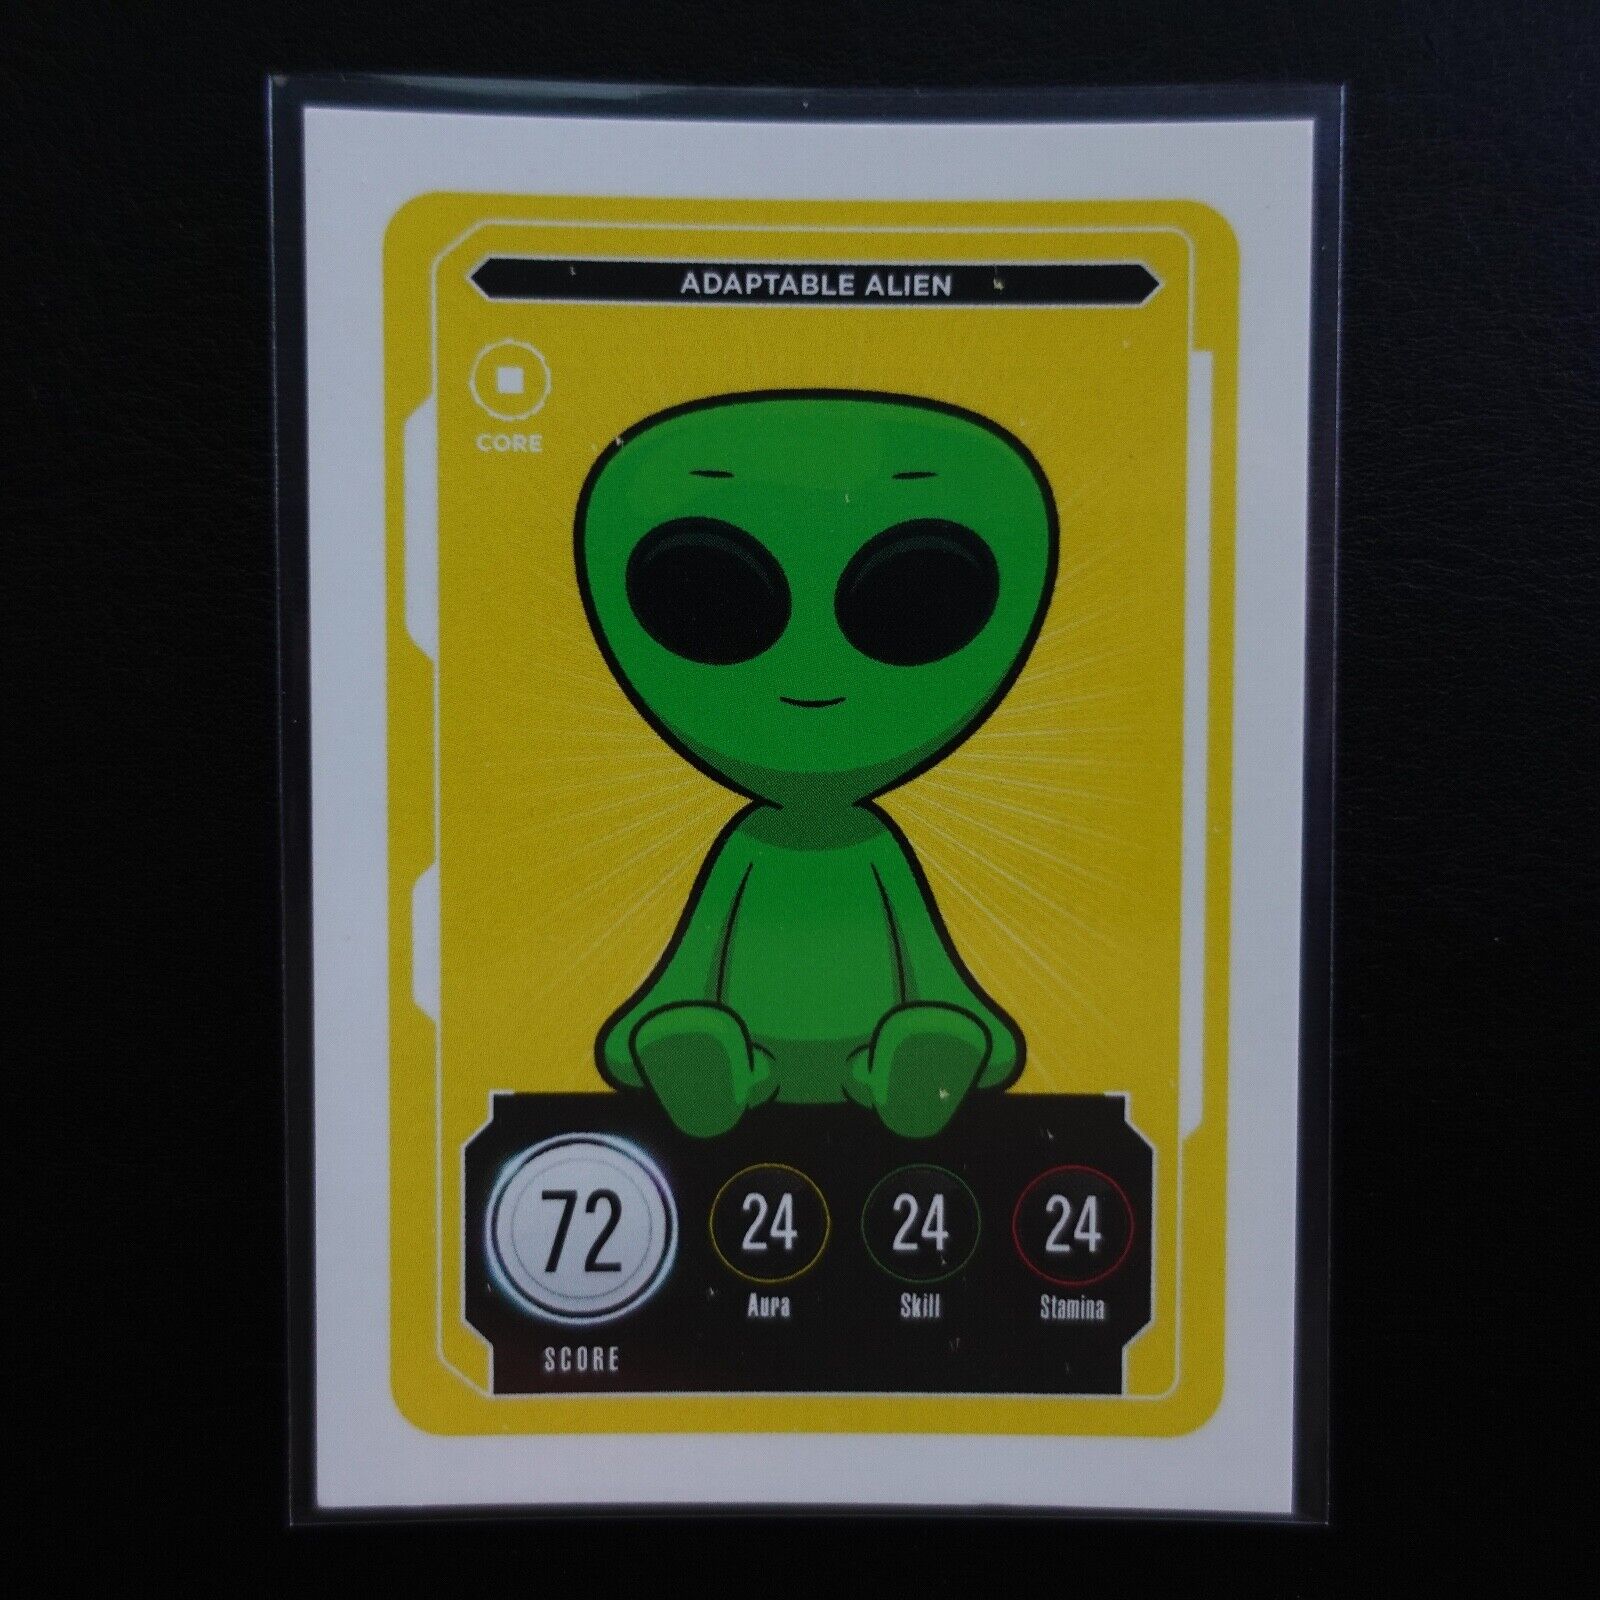 Adaptable Alien Veefriends Compete And Collect Series 2 Trading Card Gary Vee